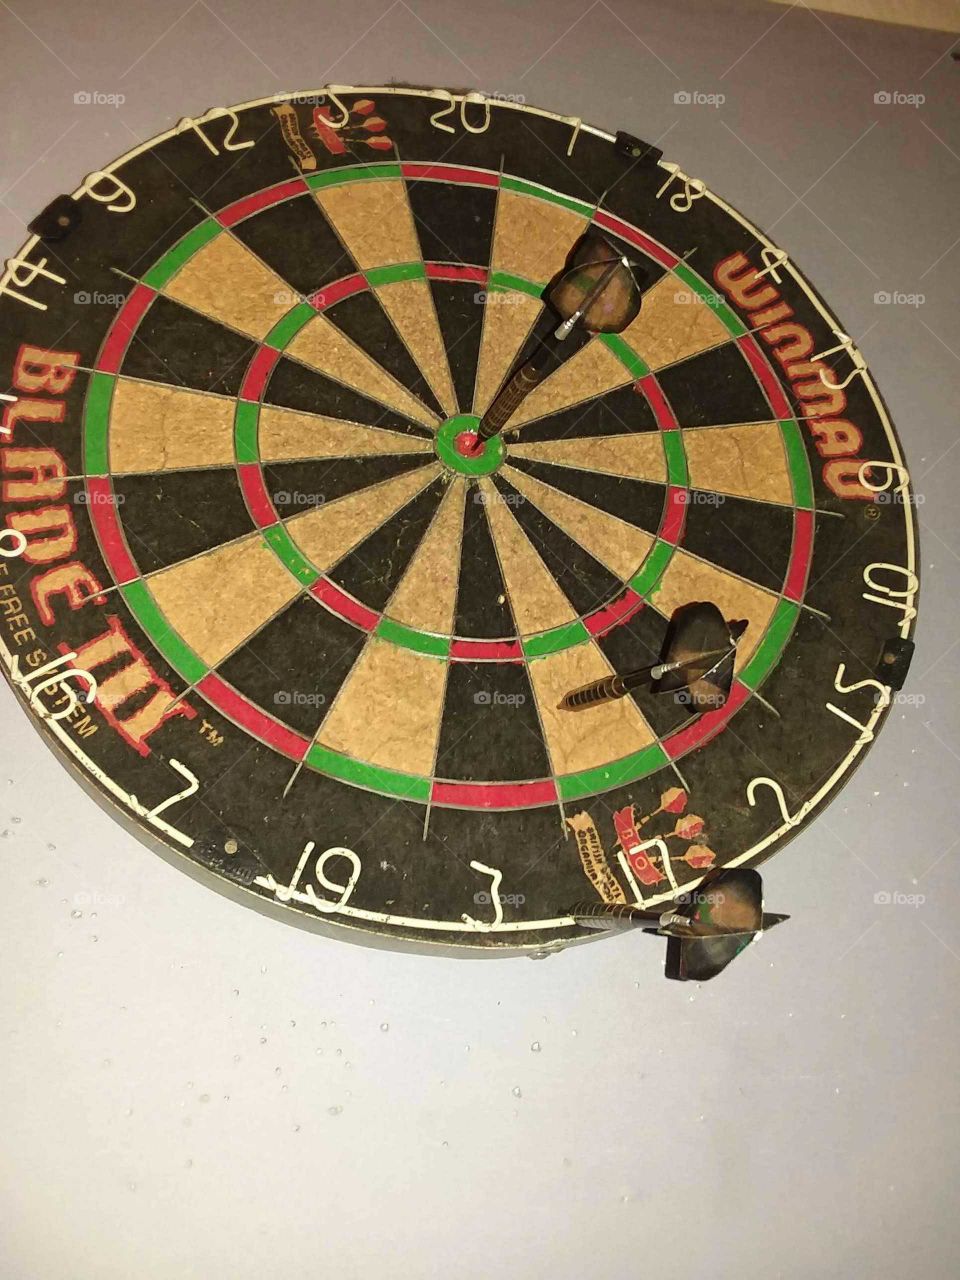 3 darts all thrown at once